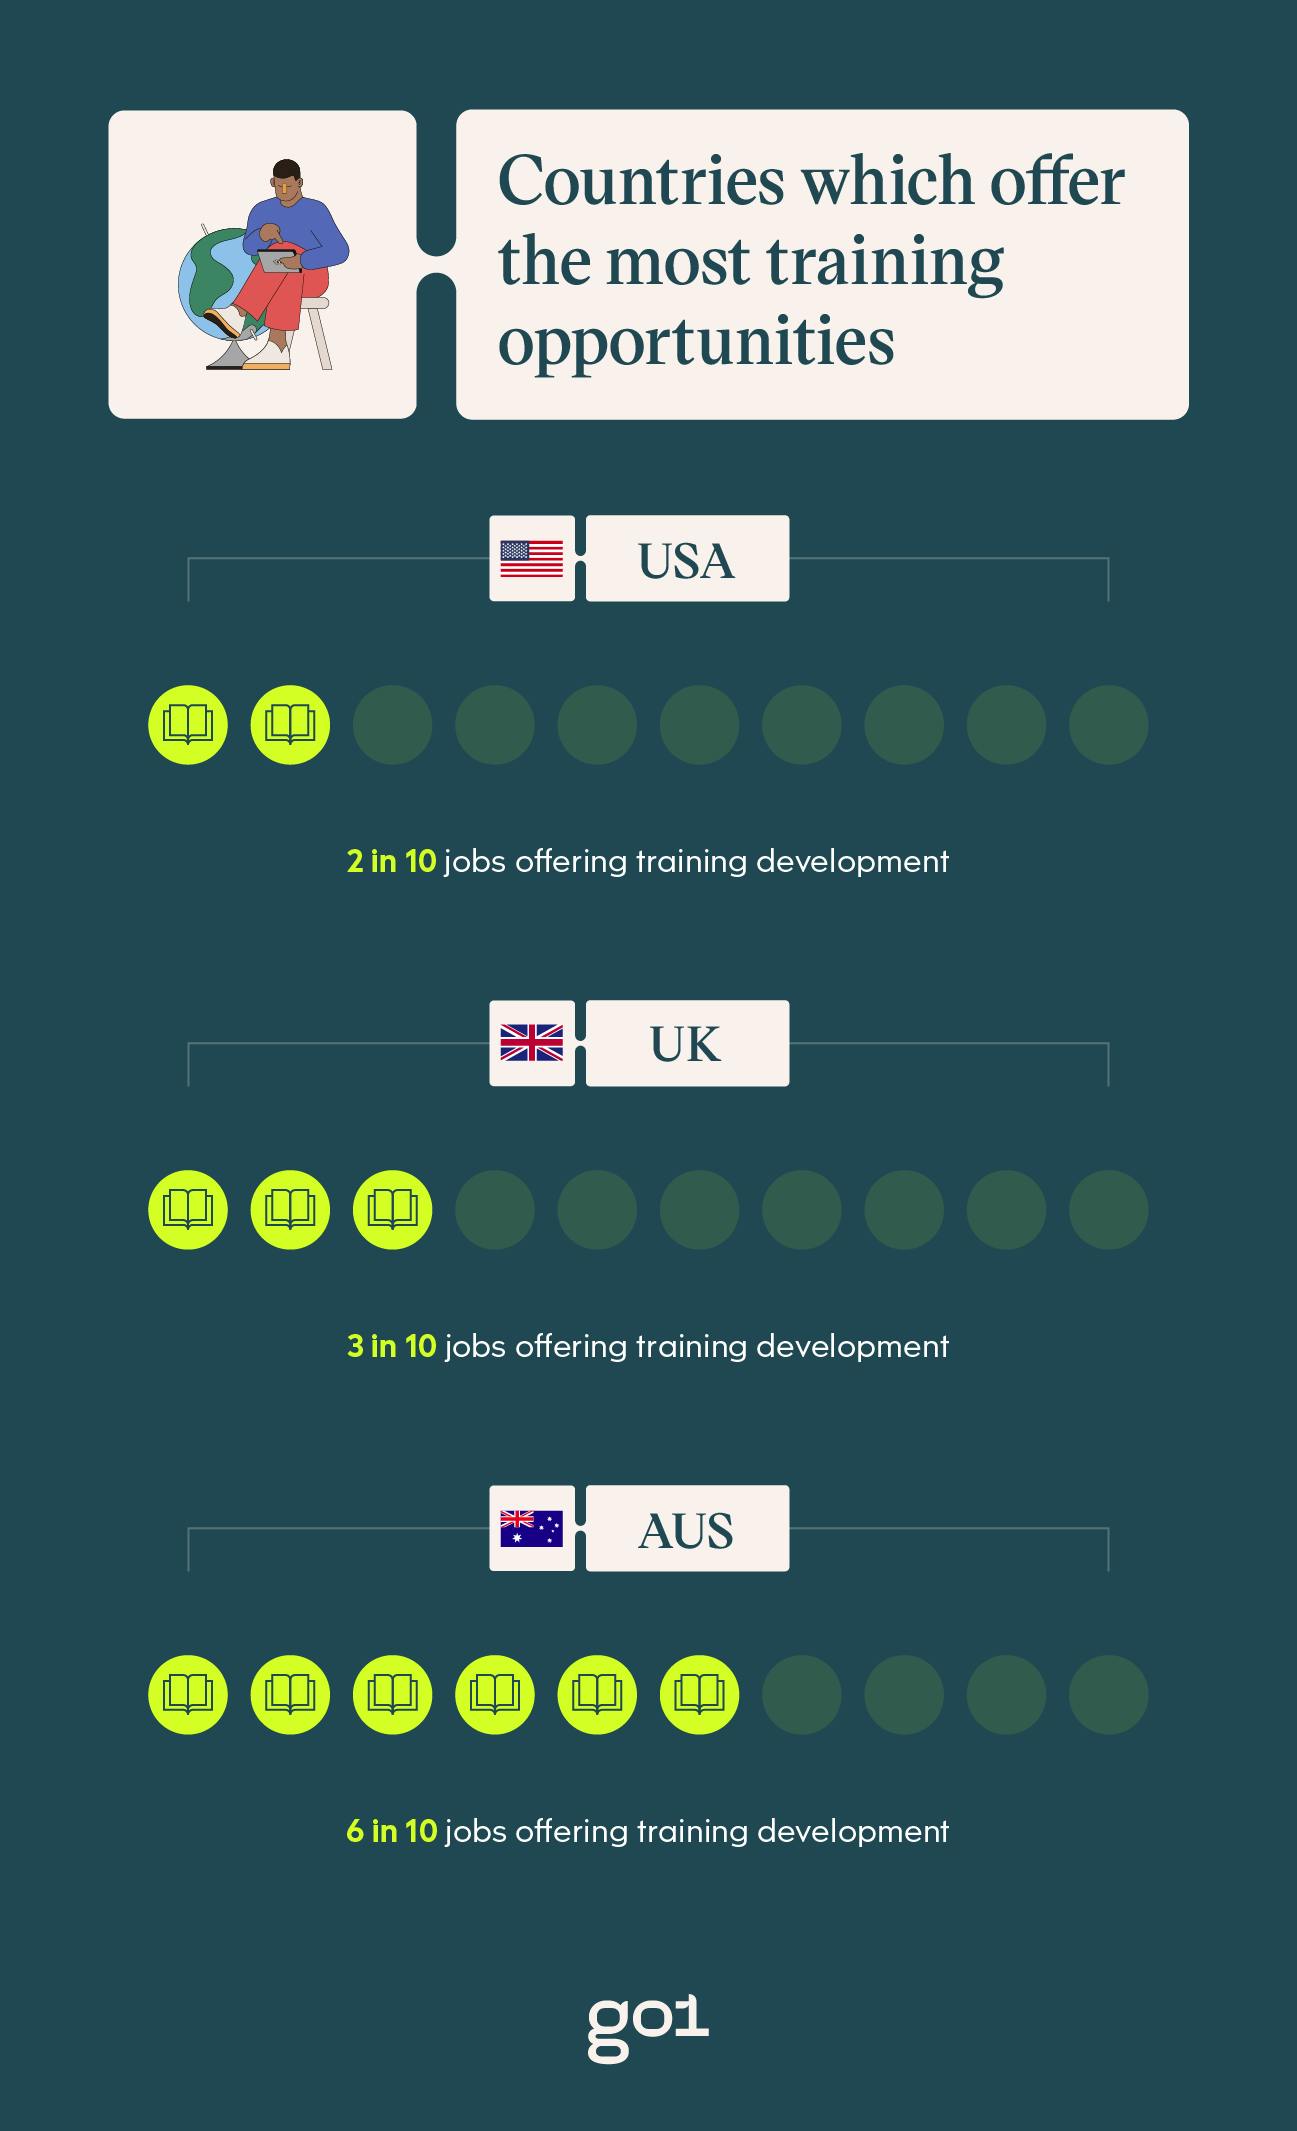 Charts displaying the countries which offer the most training opportunities